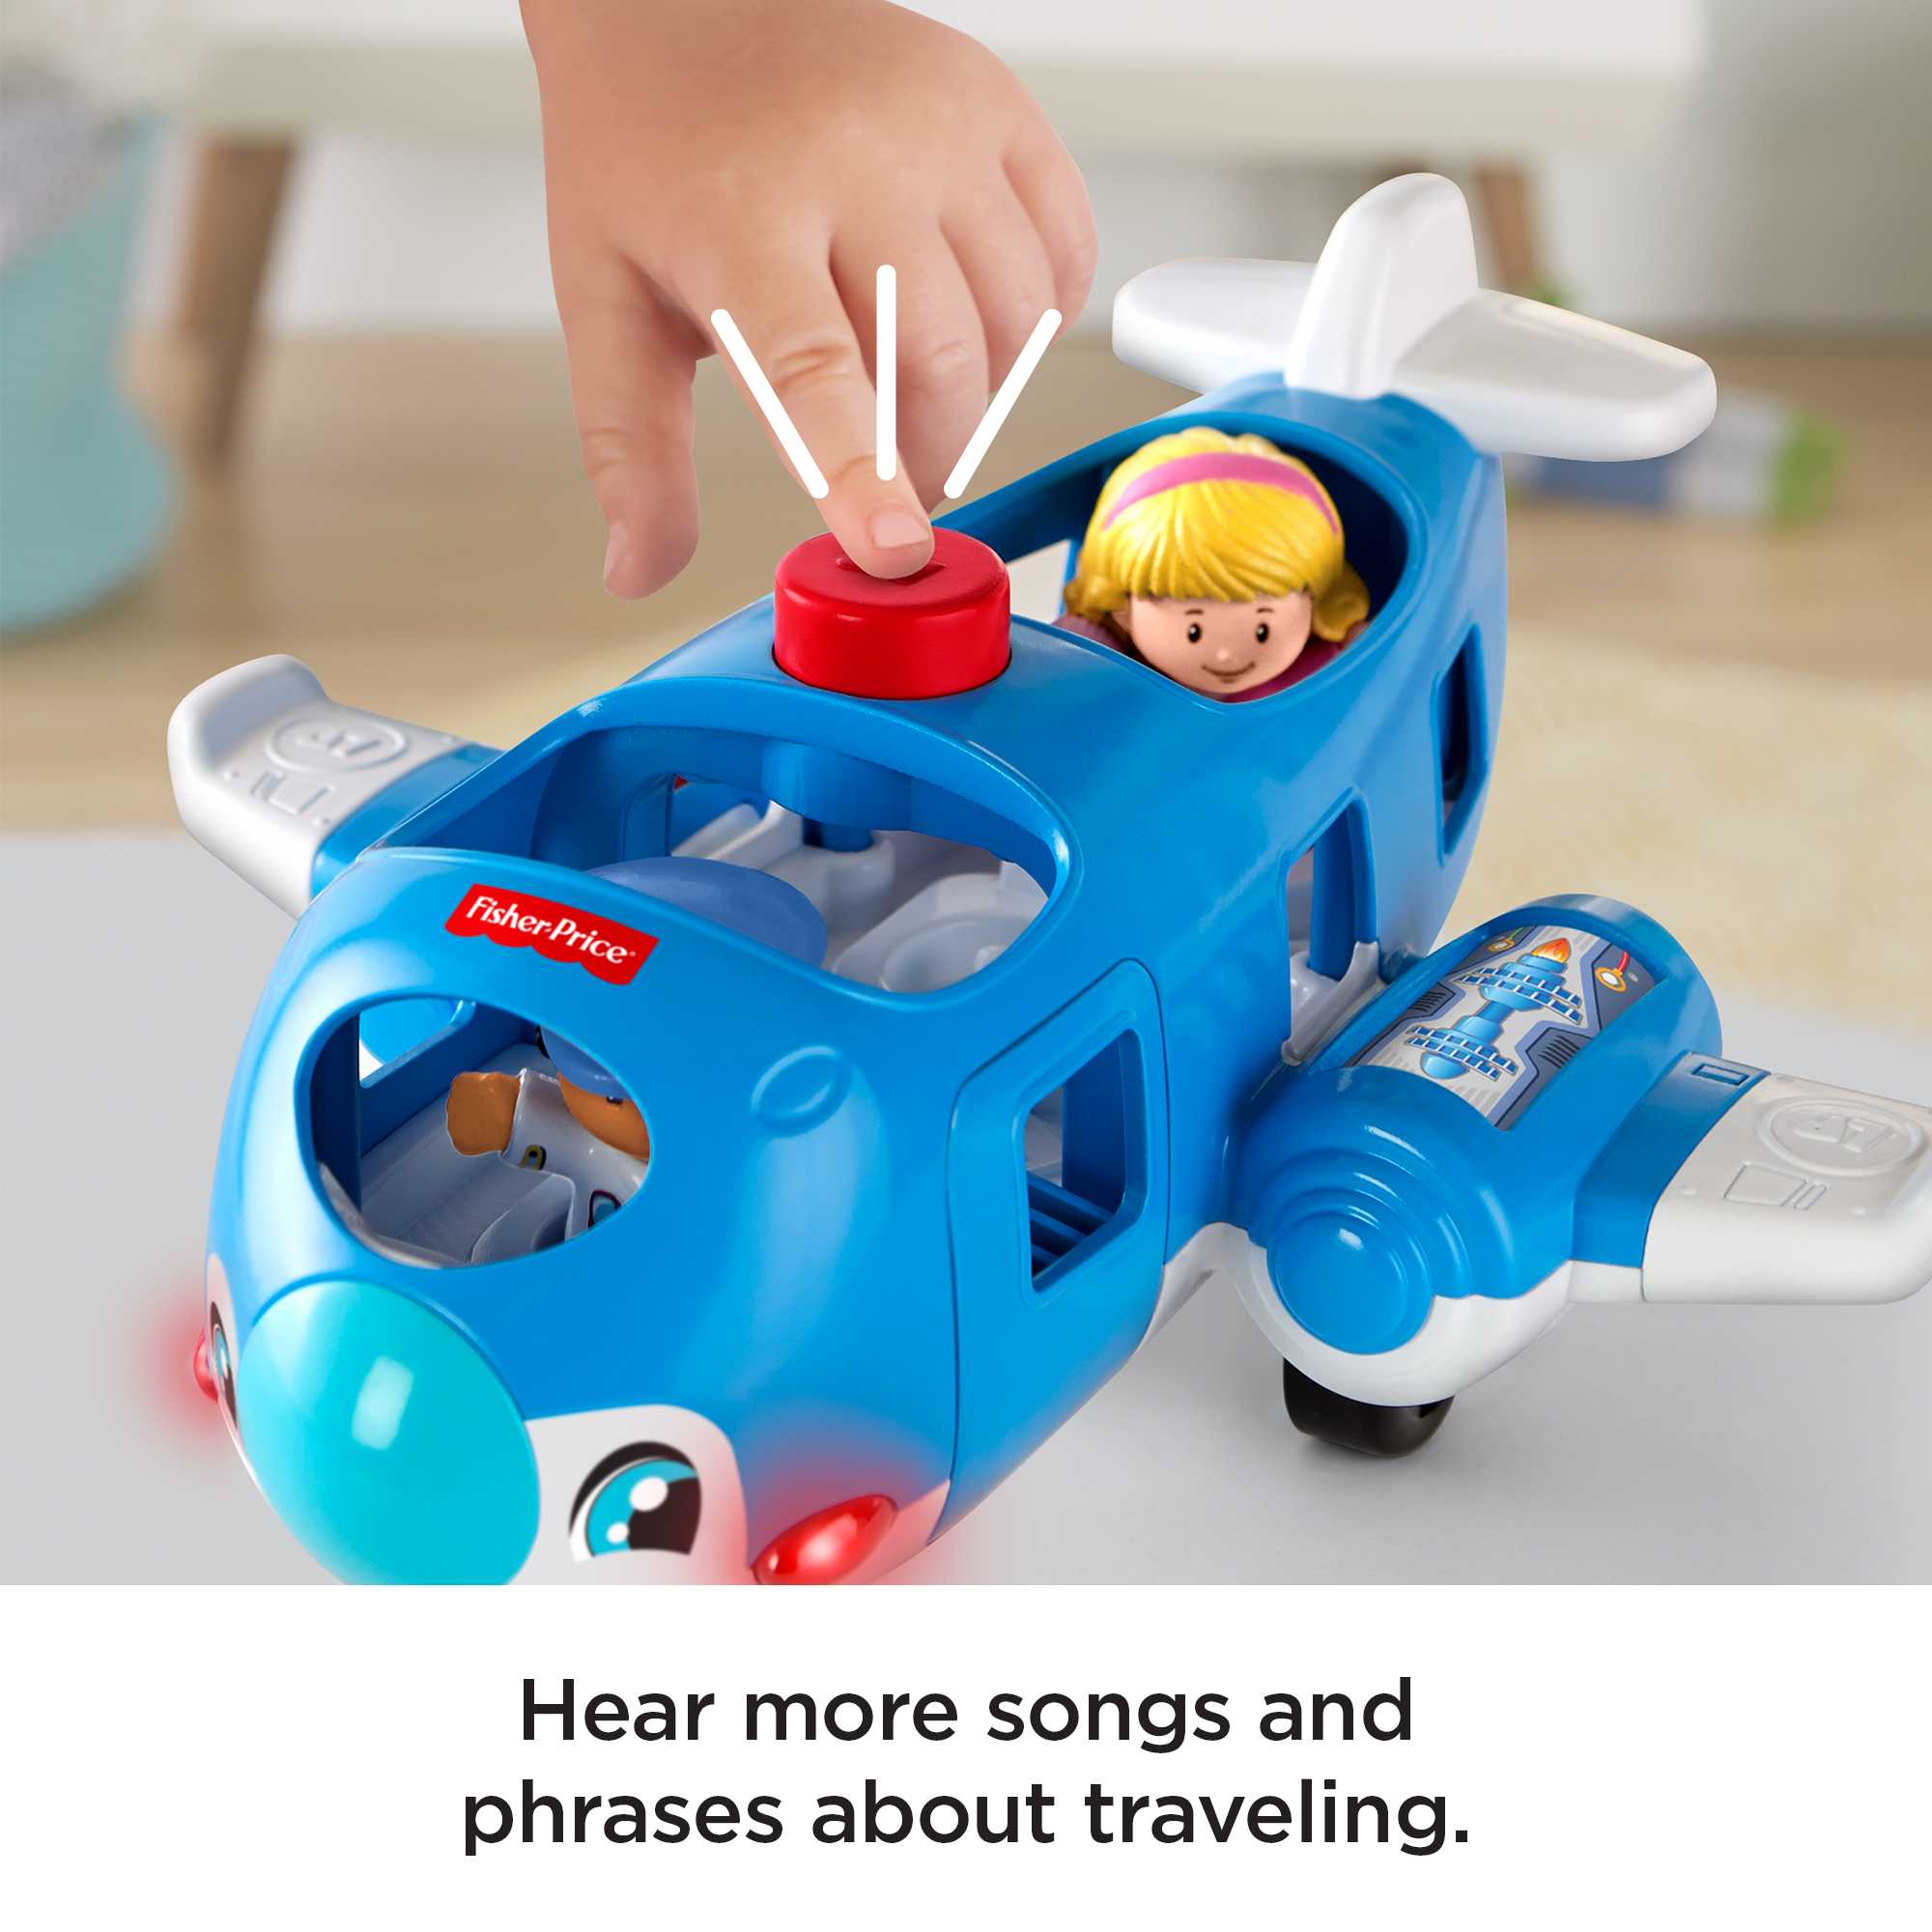 Fisher-Price Little People Travel Together Airplane Musical Toddler Toy with 2 Figures - image 4 of 8